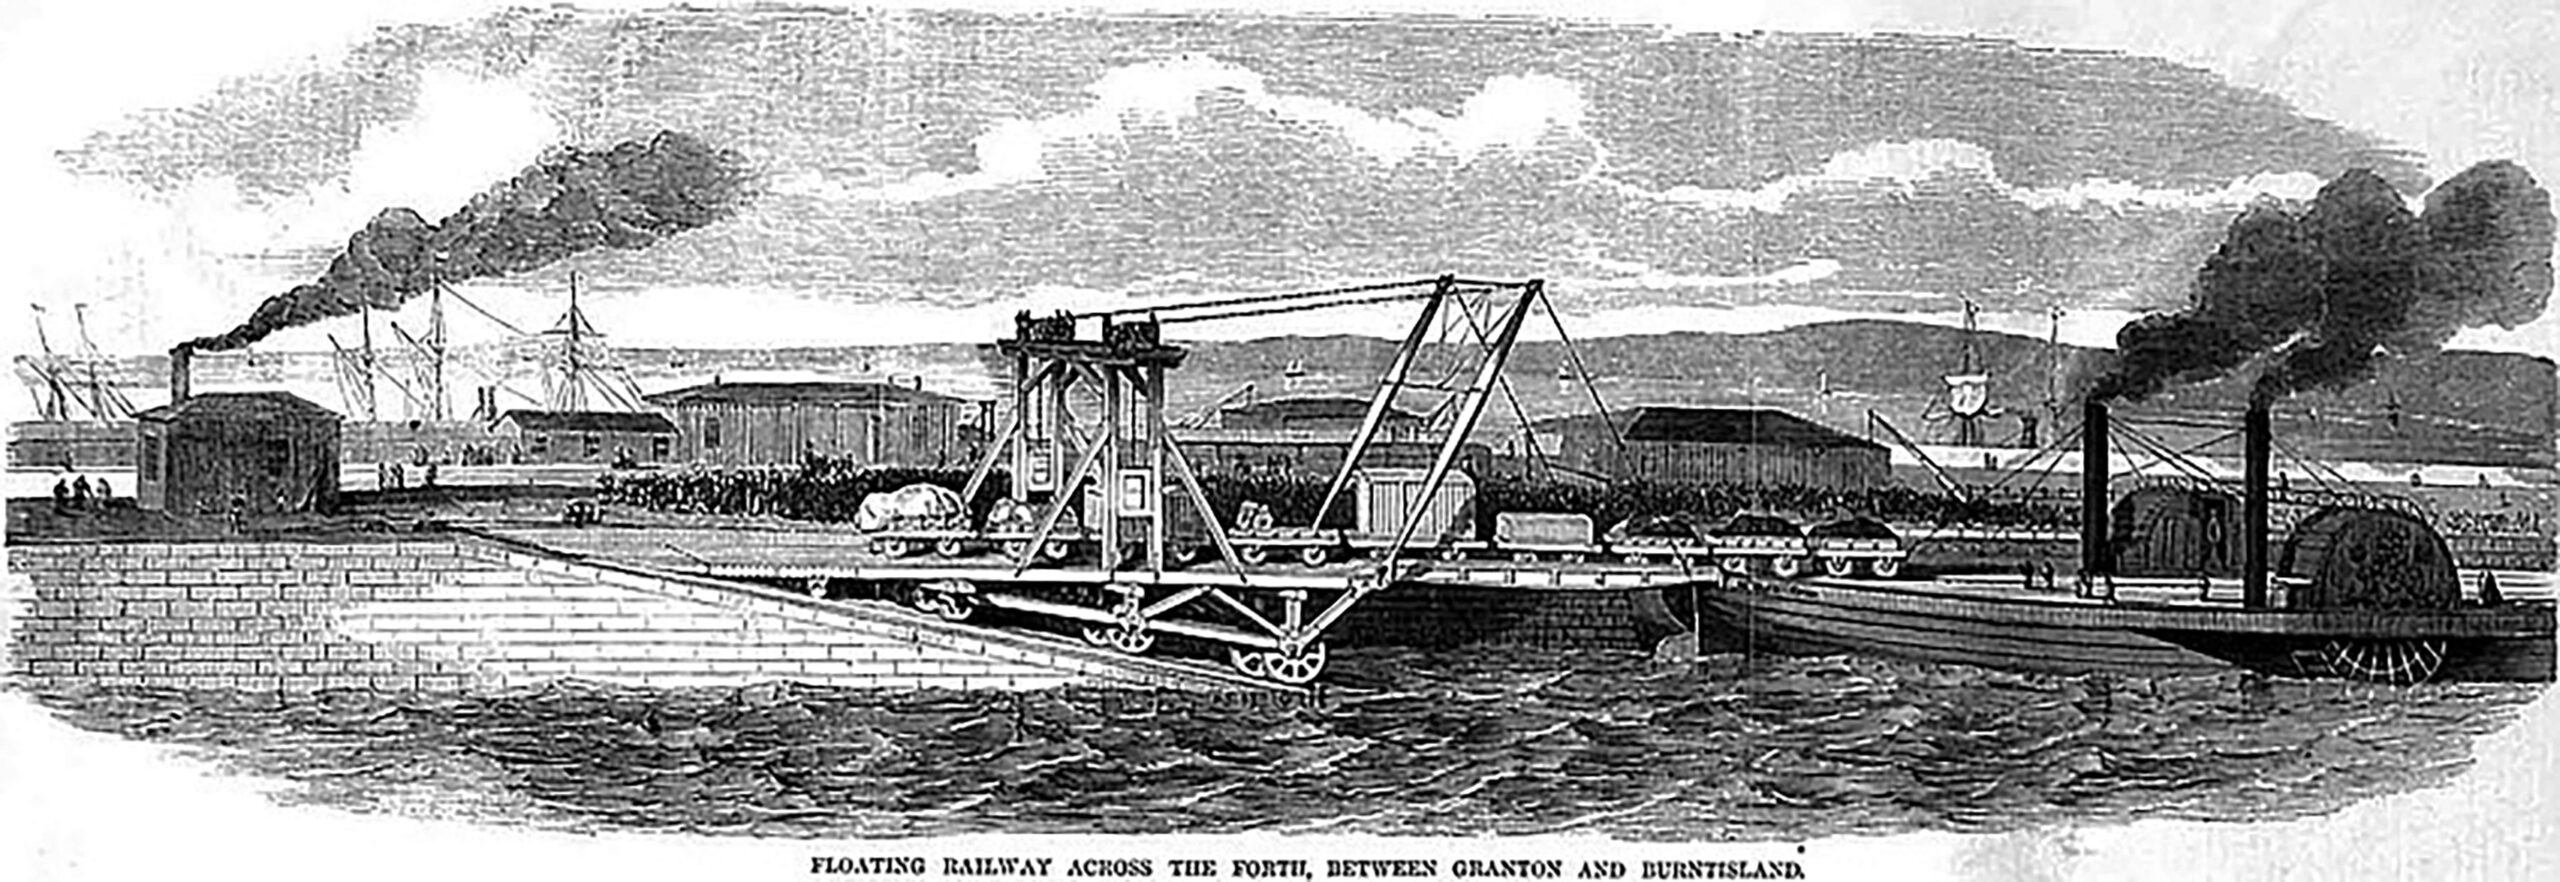 Tayport Heritage Trail - Board 24 - Similar floating railway apparatus for transporting the loaded wagons, operating at the Burntisland crossing on the Forth